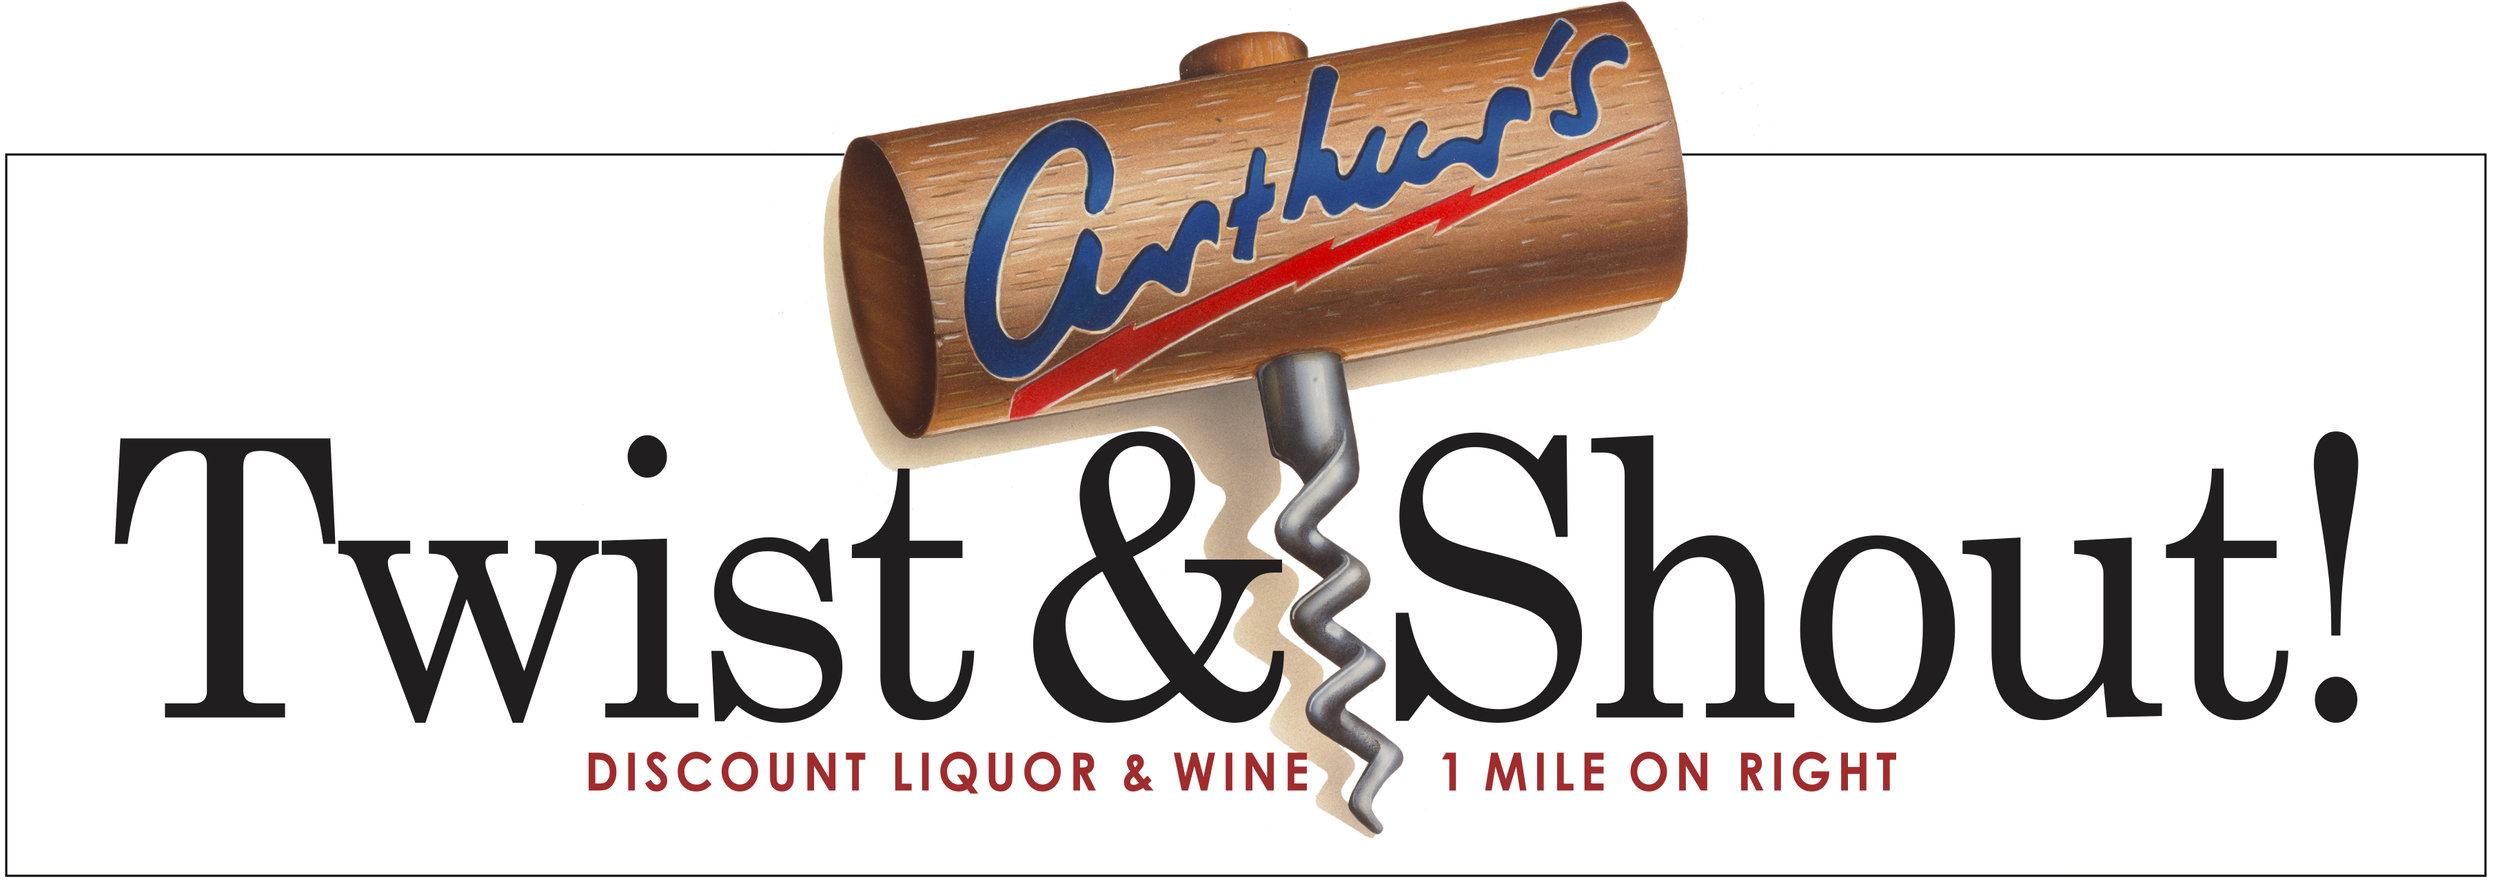  Arthur’s outdoor “Twist &amp; Shout!”  Branding creative, copywriting and design by Chuck Mitchell 